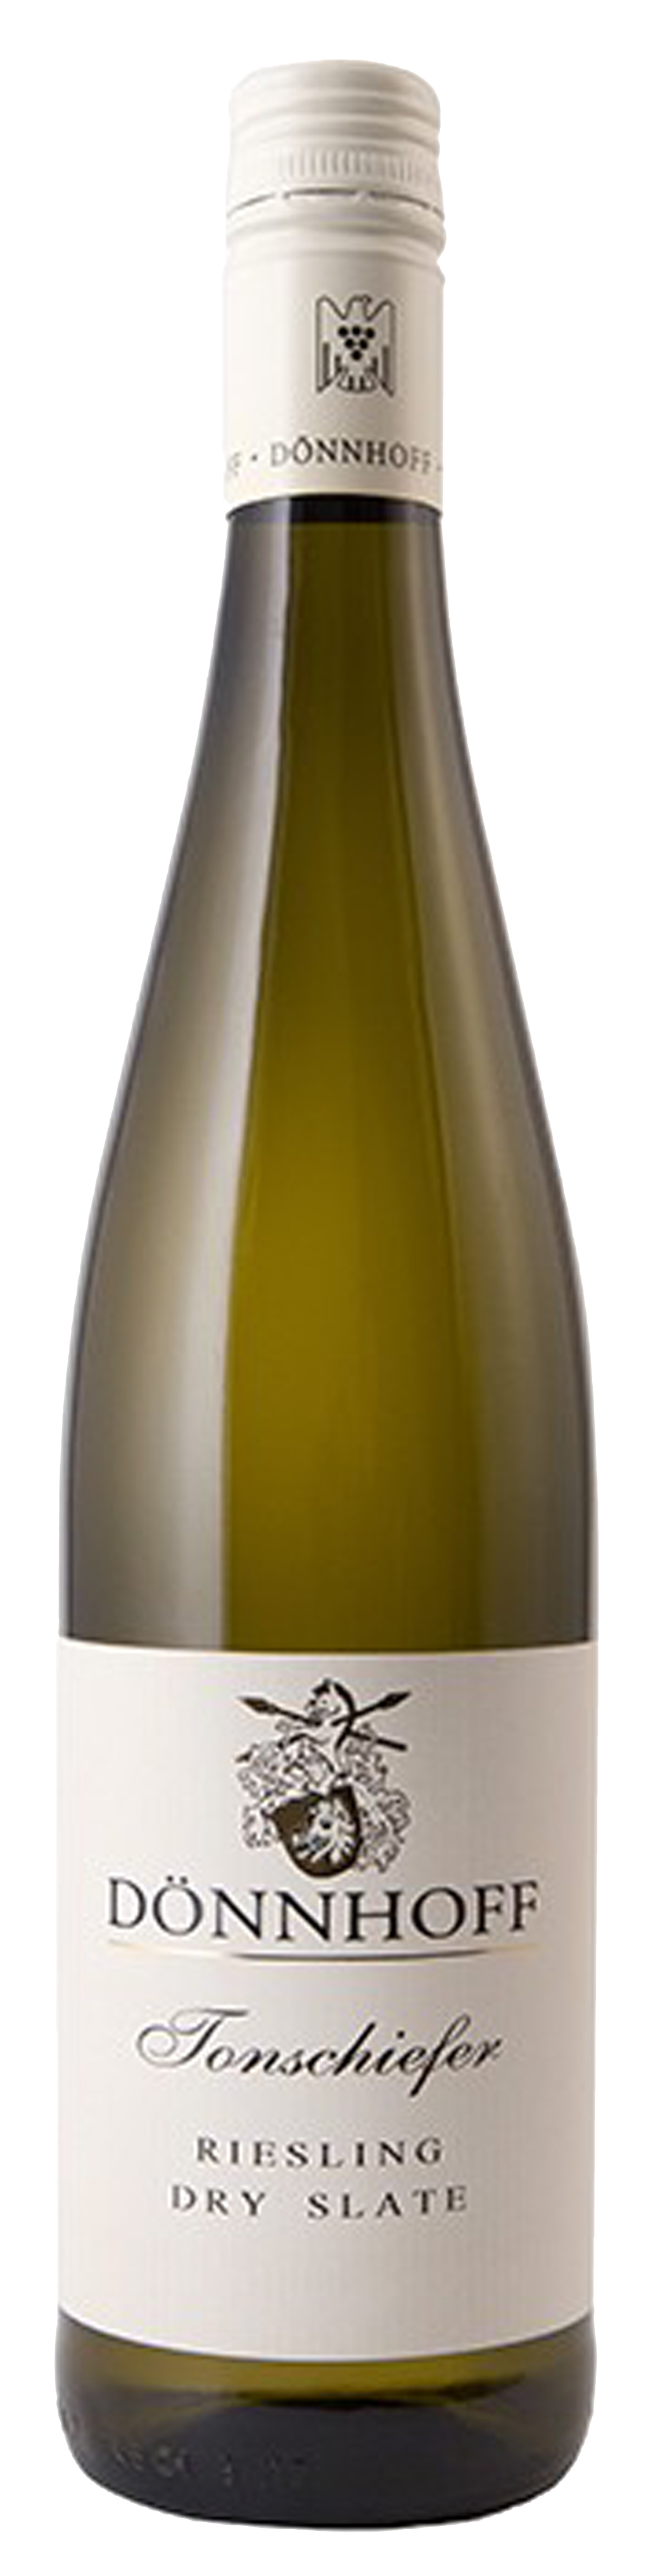 Bottle shot of 2014 Tonschiefer Dry Slate Riesling